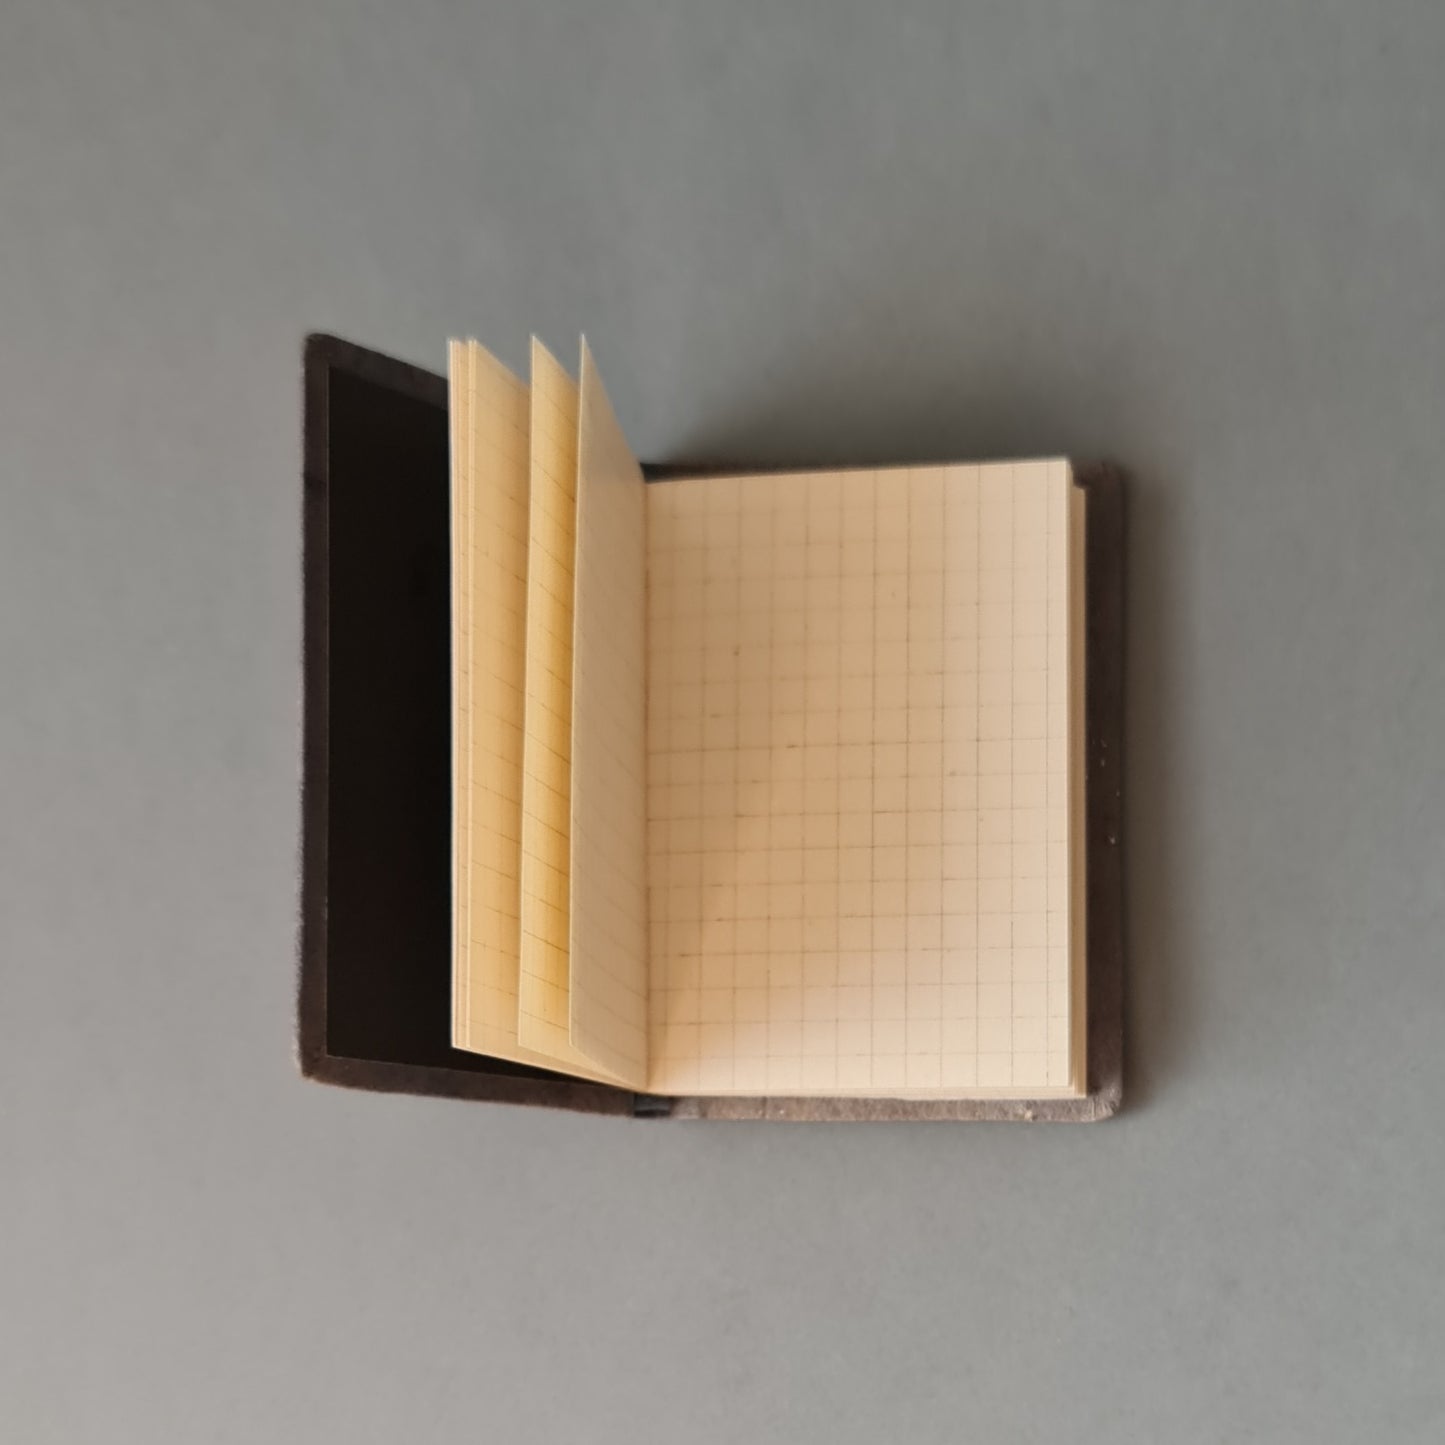 Checked notebook in a leather case. Blue-gray color with a decorative print. 7 x 10 x 1 cm (MAPL 3)